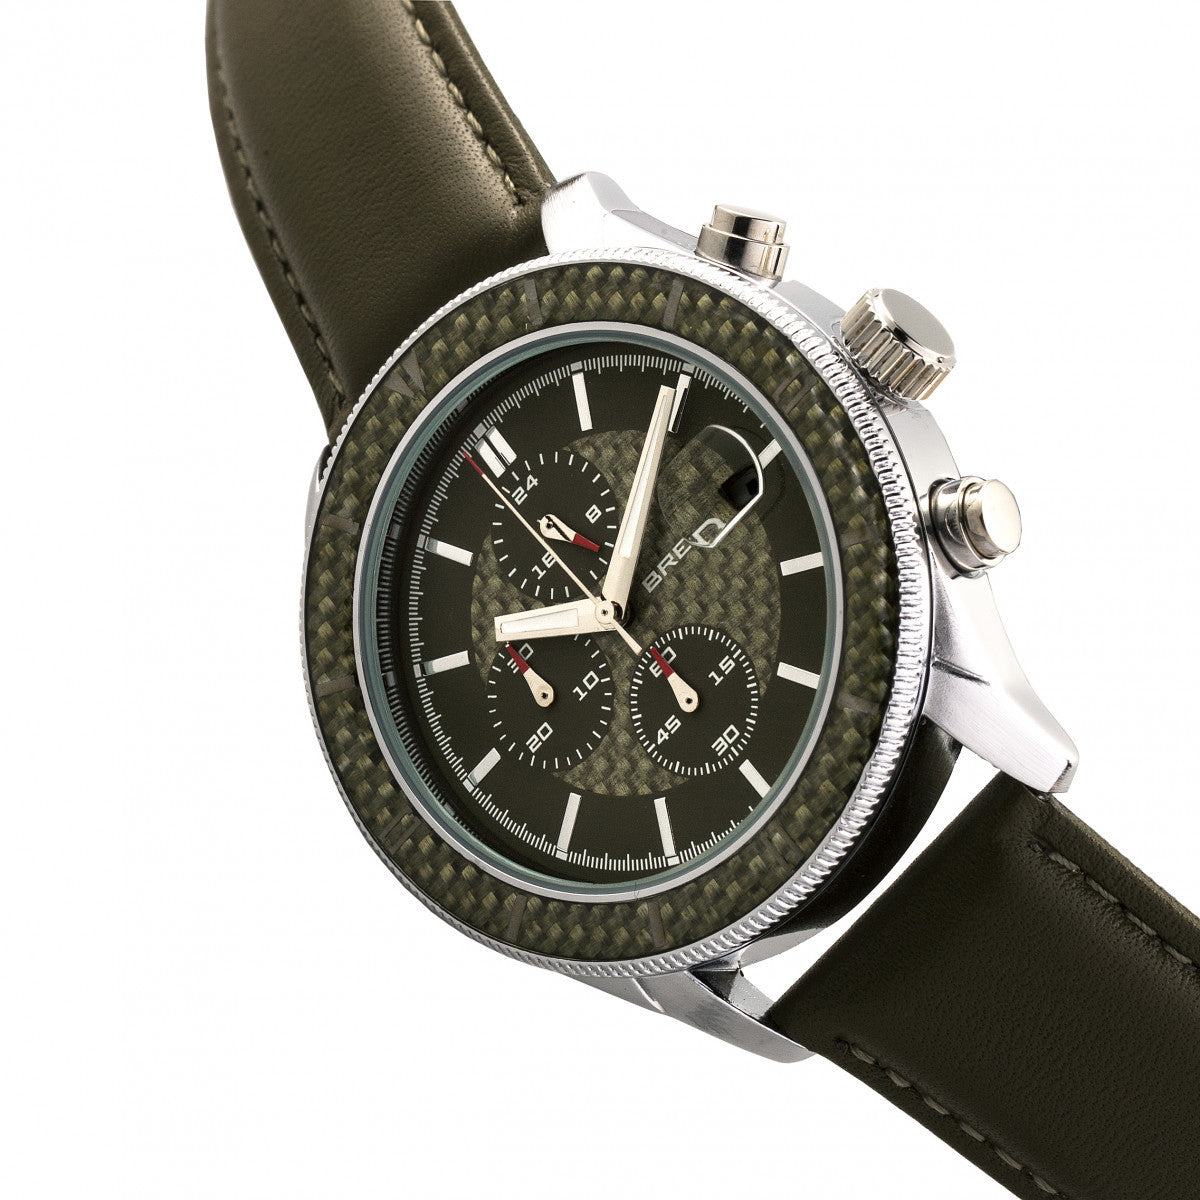 Breed Maverick Chronograph Leather-Band Watch w/Date - Silver/Olive - BRD7505